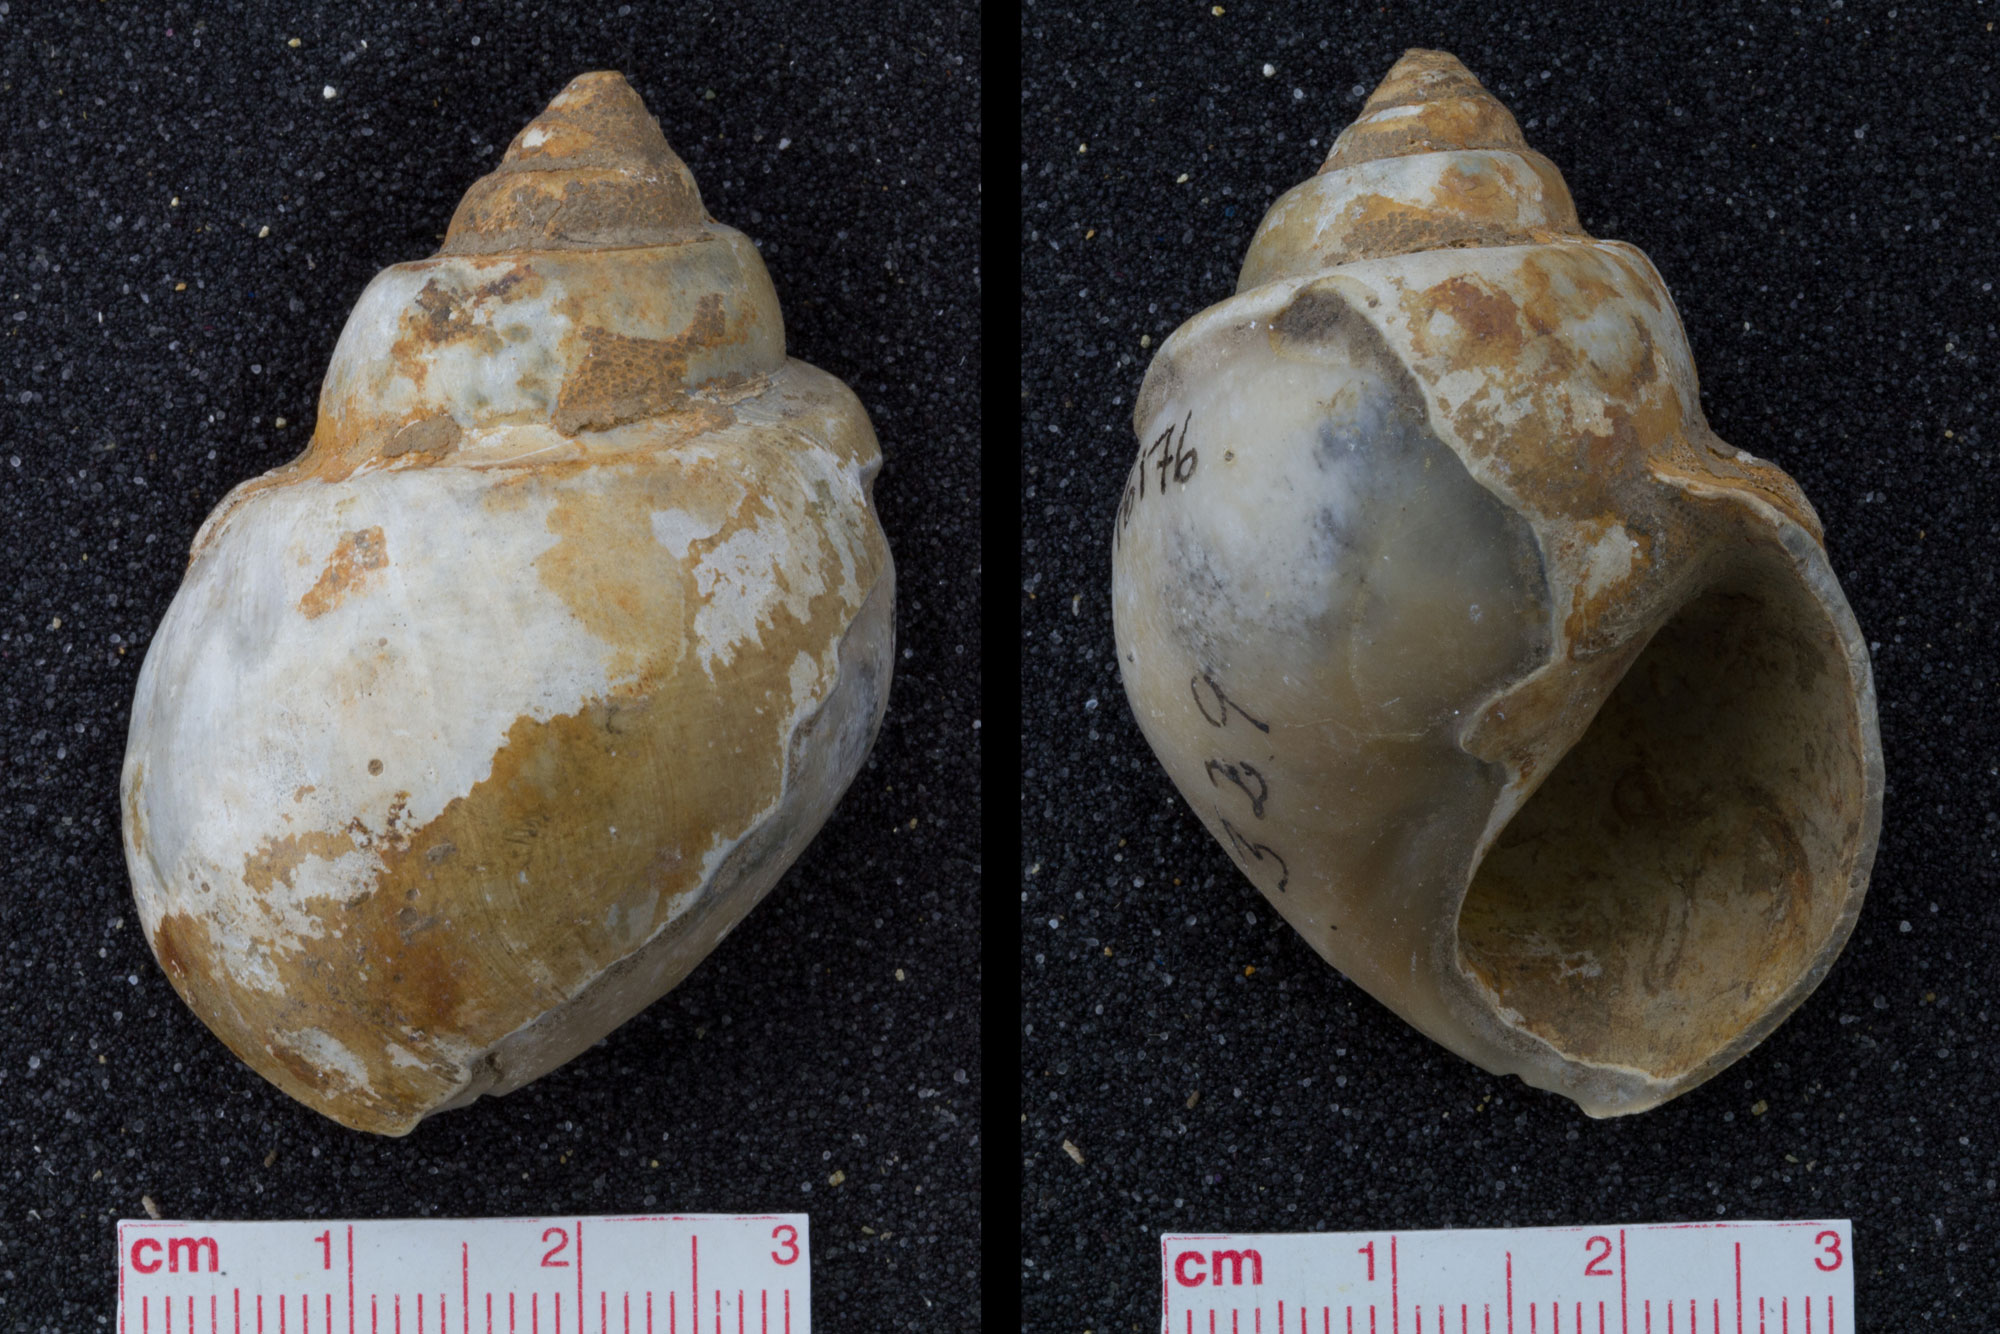 Photographs showing two views of an Eocene marine snail shell, spire pointed upward. The shell is a little over 3 centimeters wide.